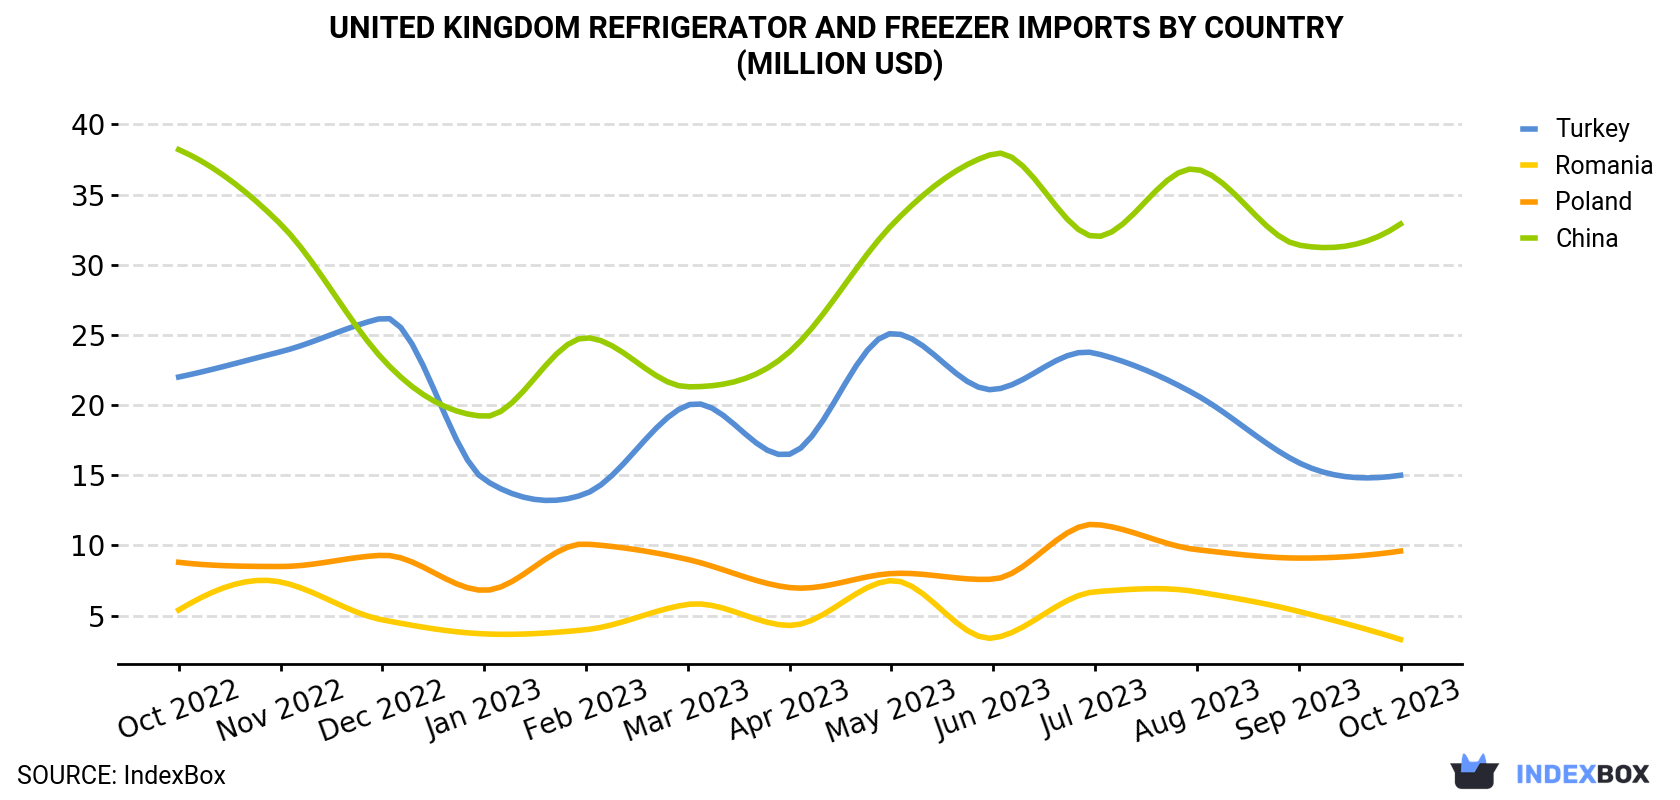 United Kingdom Refrigerator and Freezer Imports By Country (Million USD)